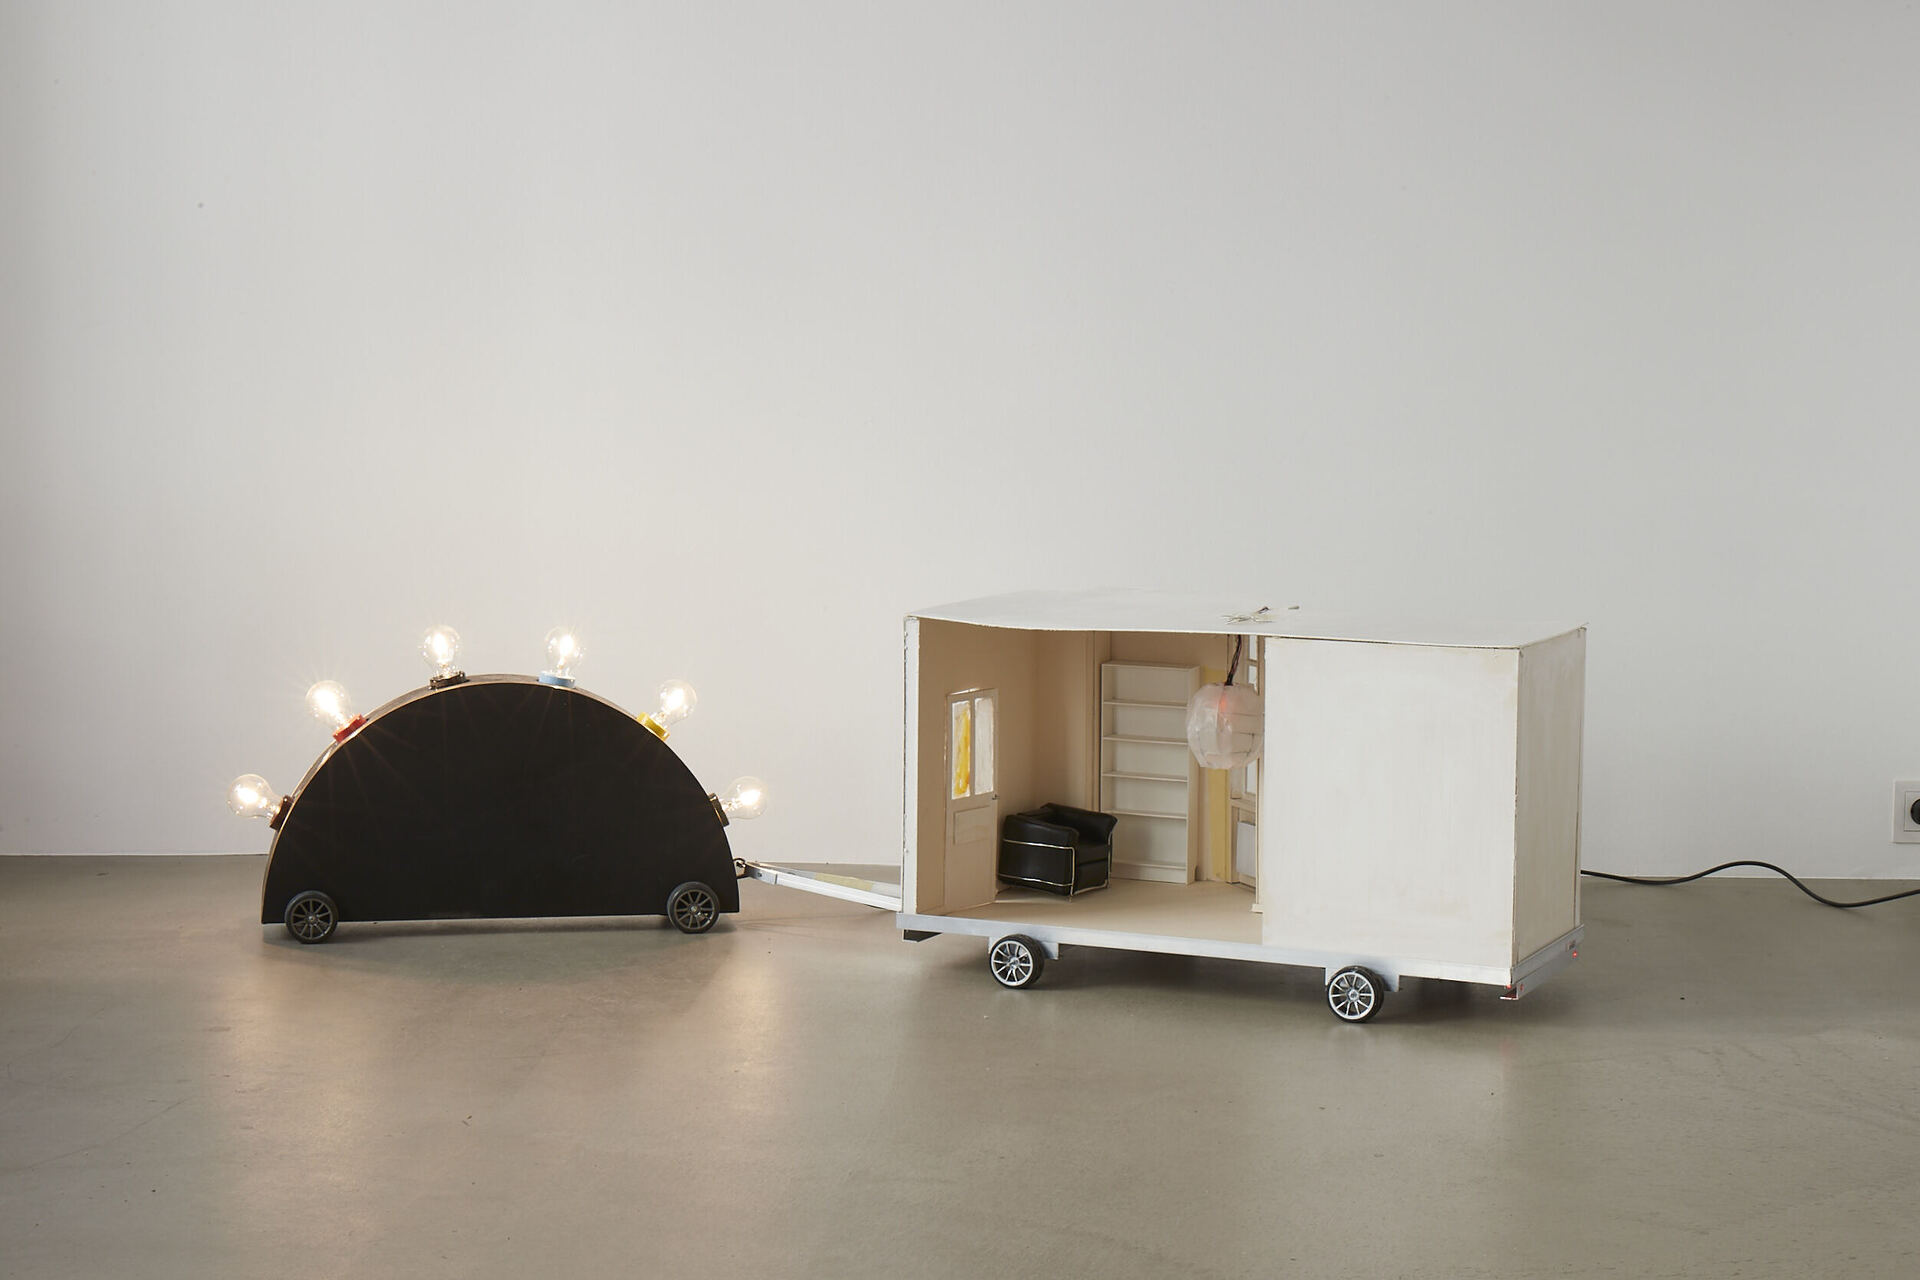 Frieder Haller, Memphis Blues (after Martine Bedin) V, 2021 Wood, coating, electrical wiring, six light bulbs, board, aluminium, leather, wire and model car wheels 43,6 × 176,5 × 53 cm / 17.1 × 69.4 × 20.8 inches